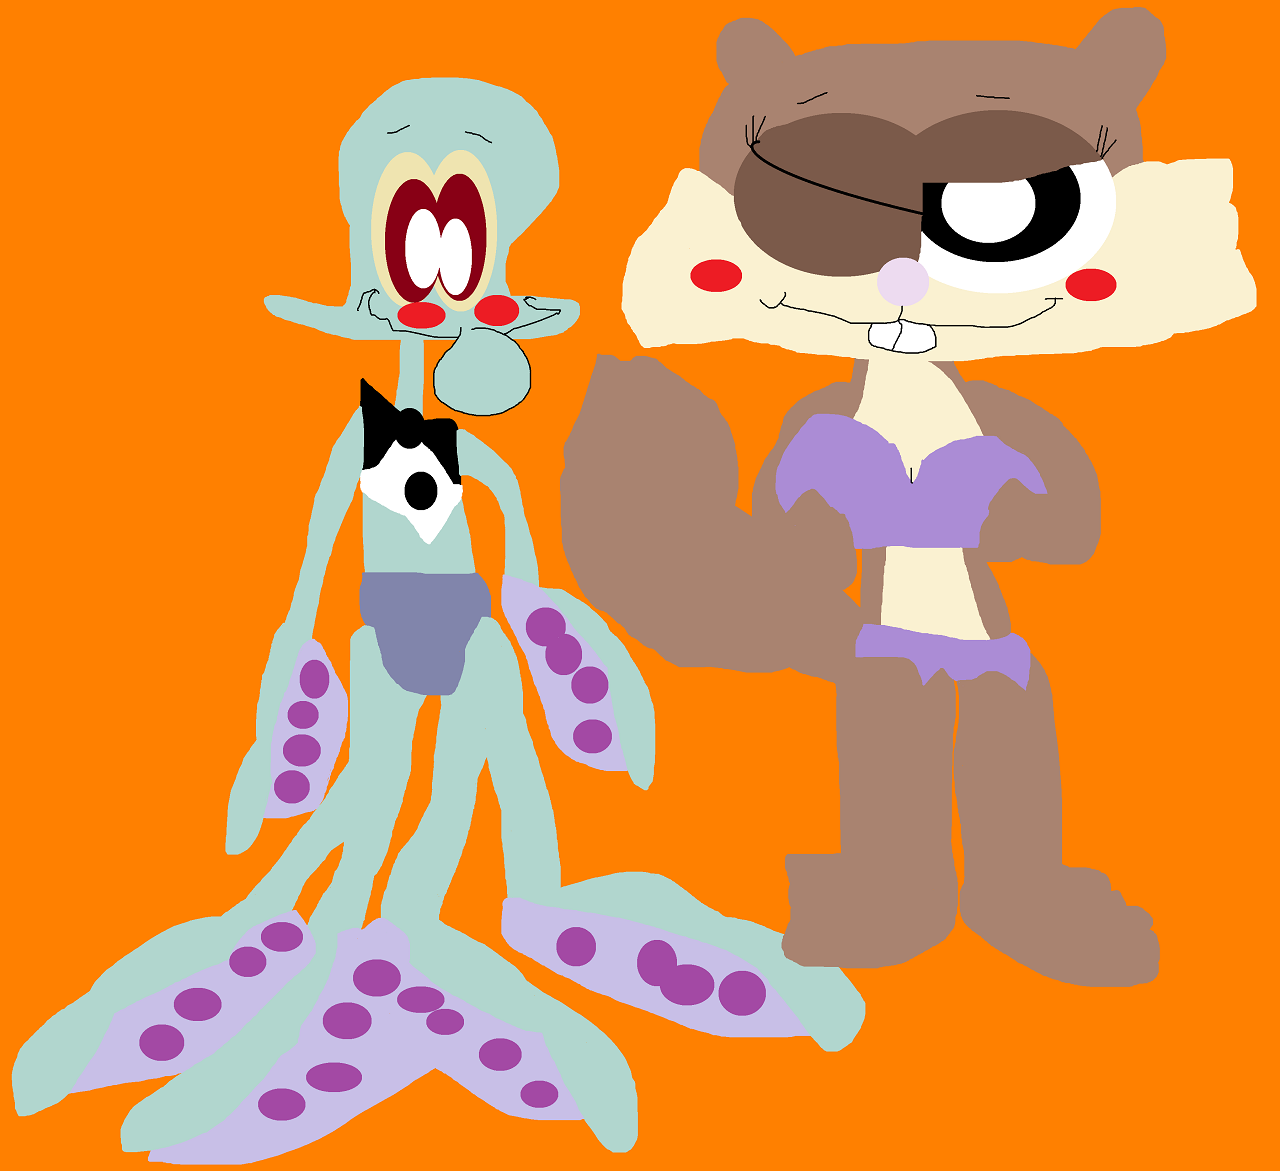 Sandy Winking At Squidward Who Is Wearing A Bowtie And Undies by Falconlobo